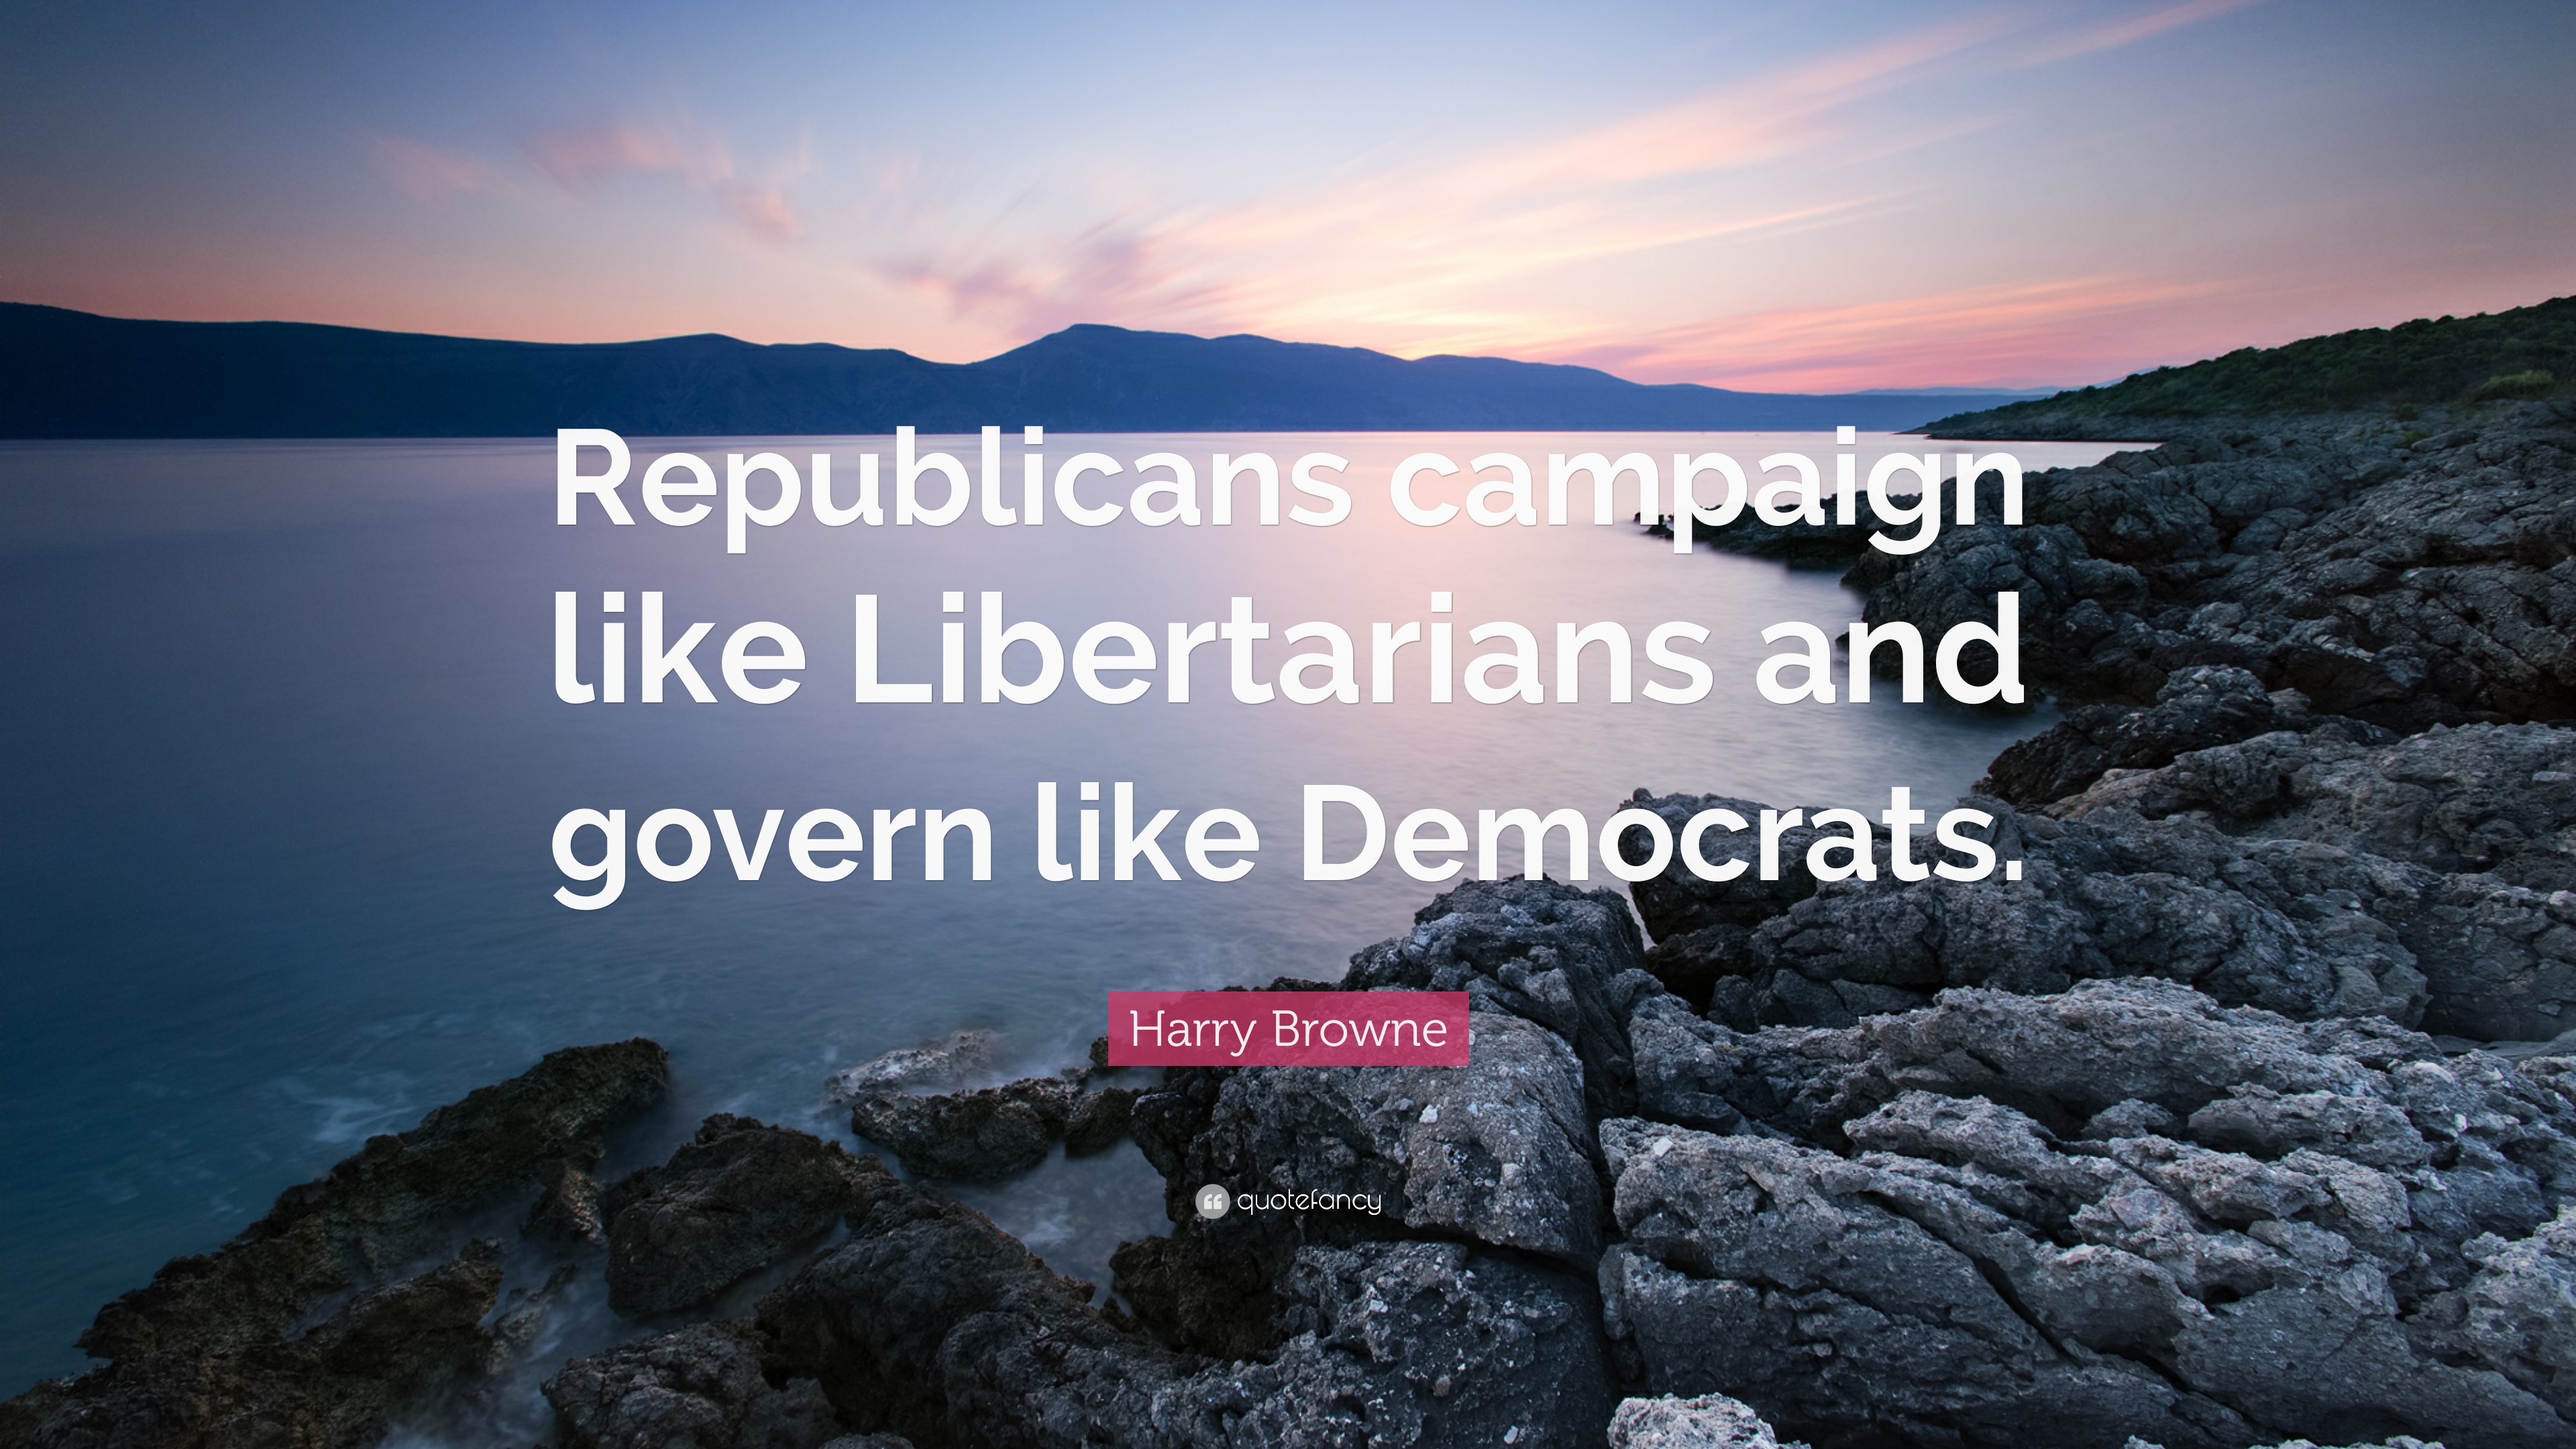 Harry Browne Quote: “Republicans campaign like Libertarians